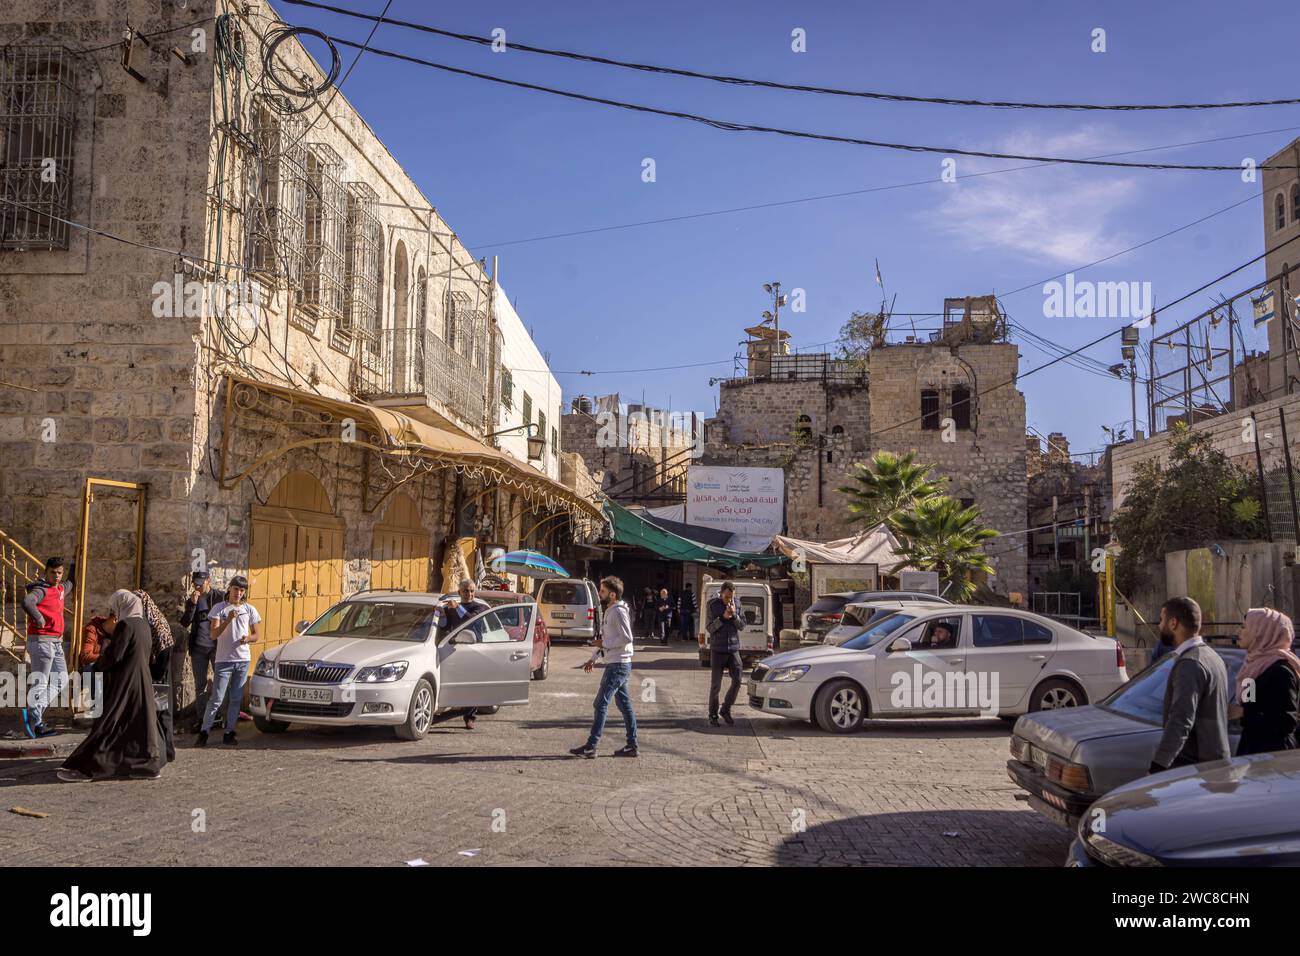 The Palestinian people walking in the dowtown of Hebron, West bank (Palestine) with the old stone buildings and sign 'Welcome to Hebron Old City' (in Stock Photo